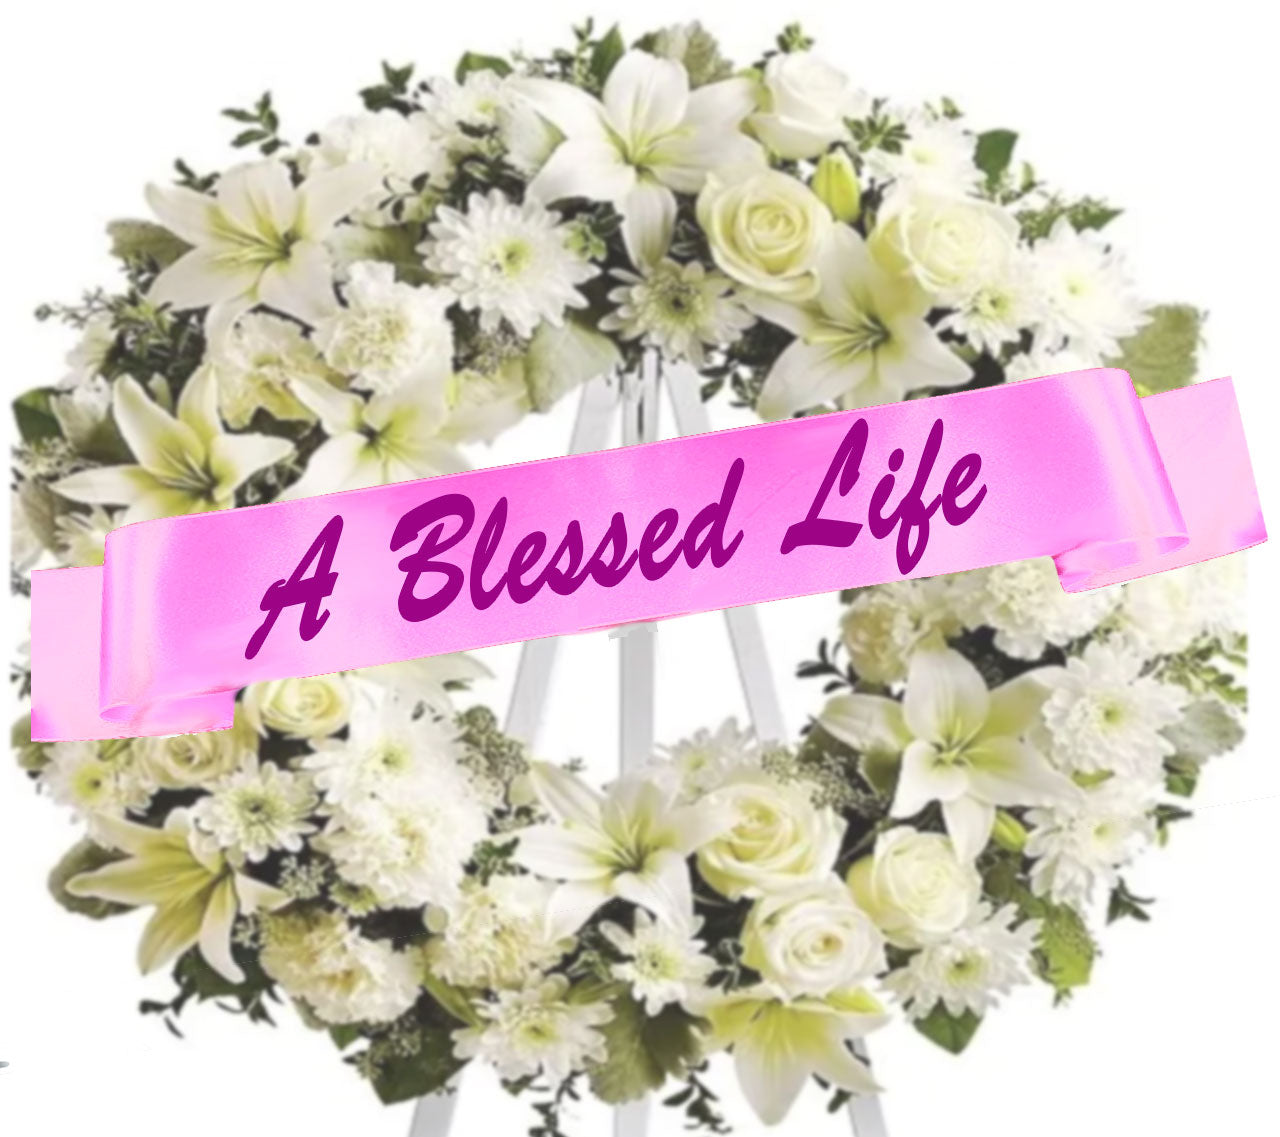 Blessed Life Funeral Flowers Ribbon Banner.